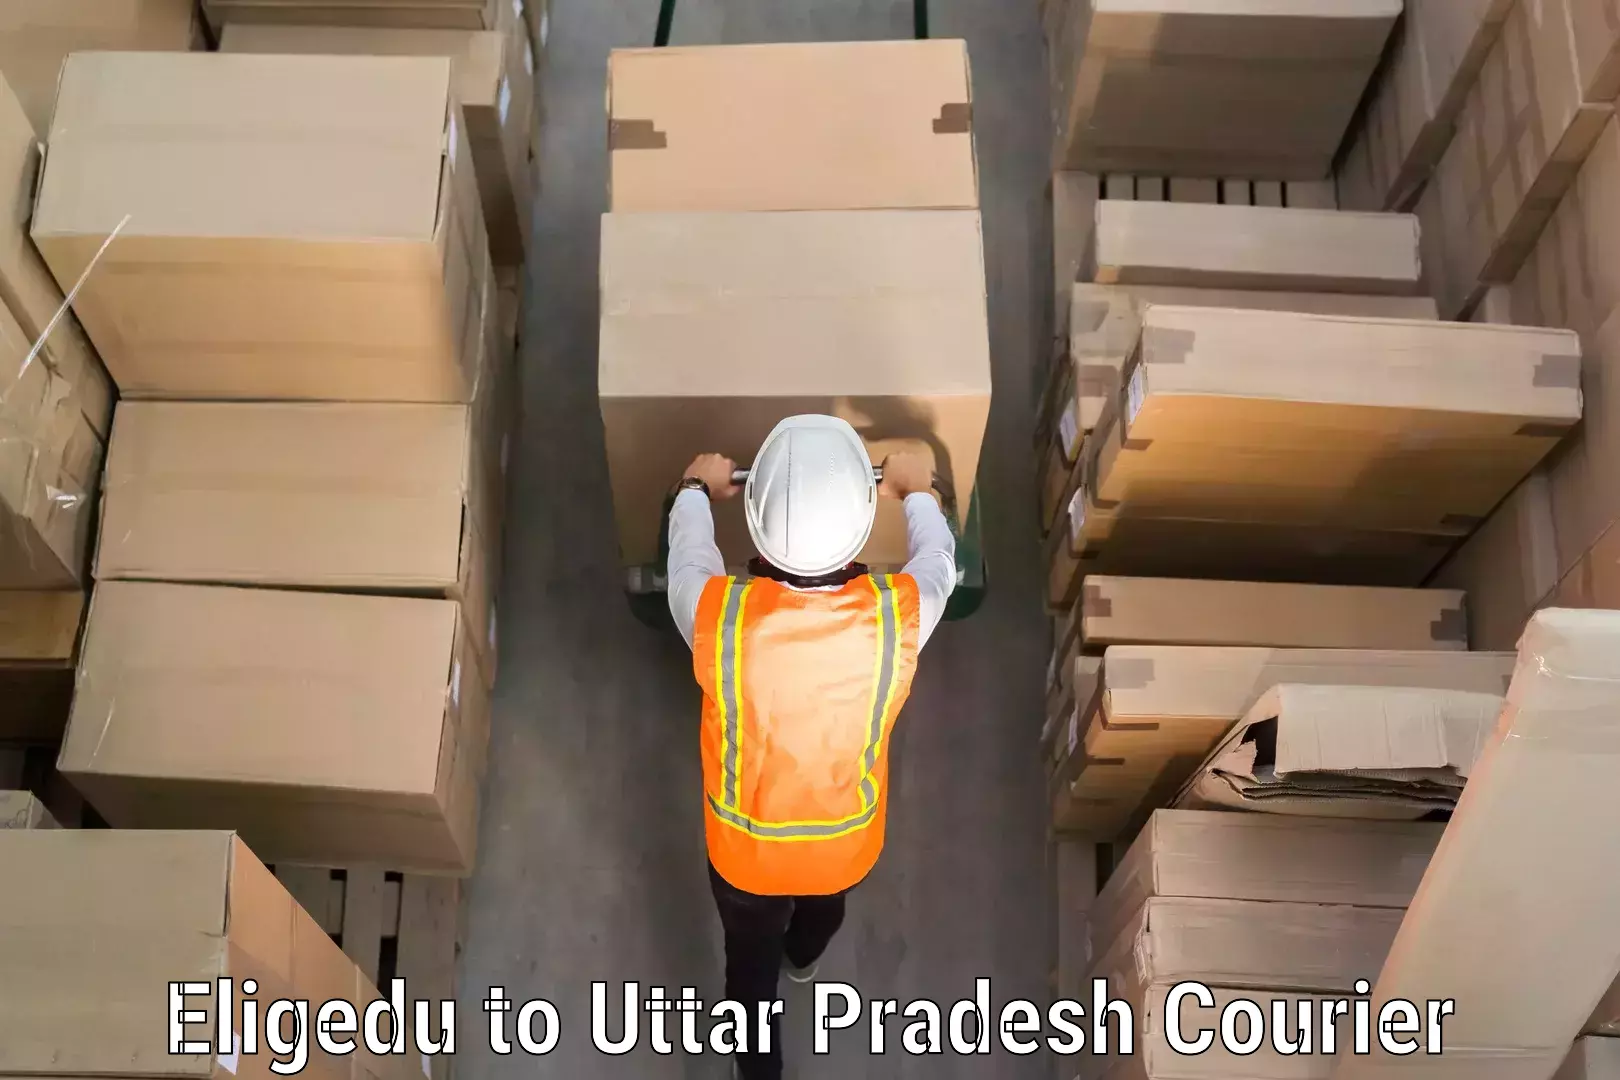 Online luggage shipping booking Eligedu to Agra